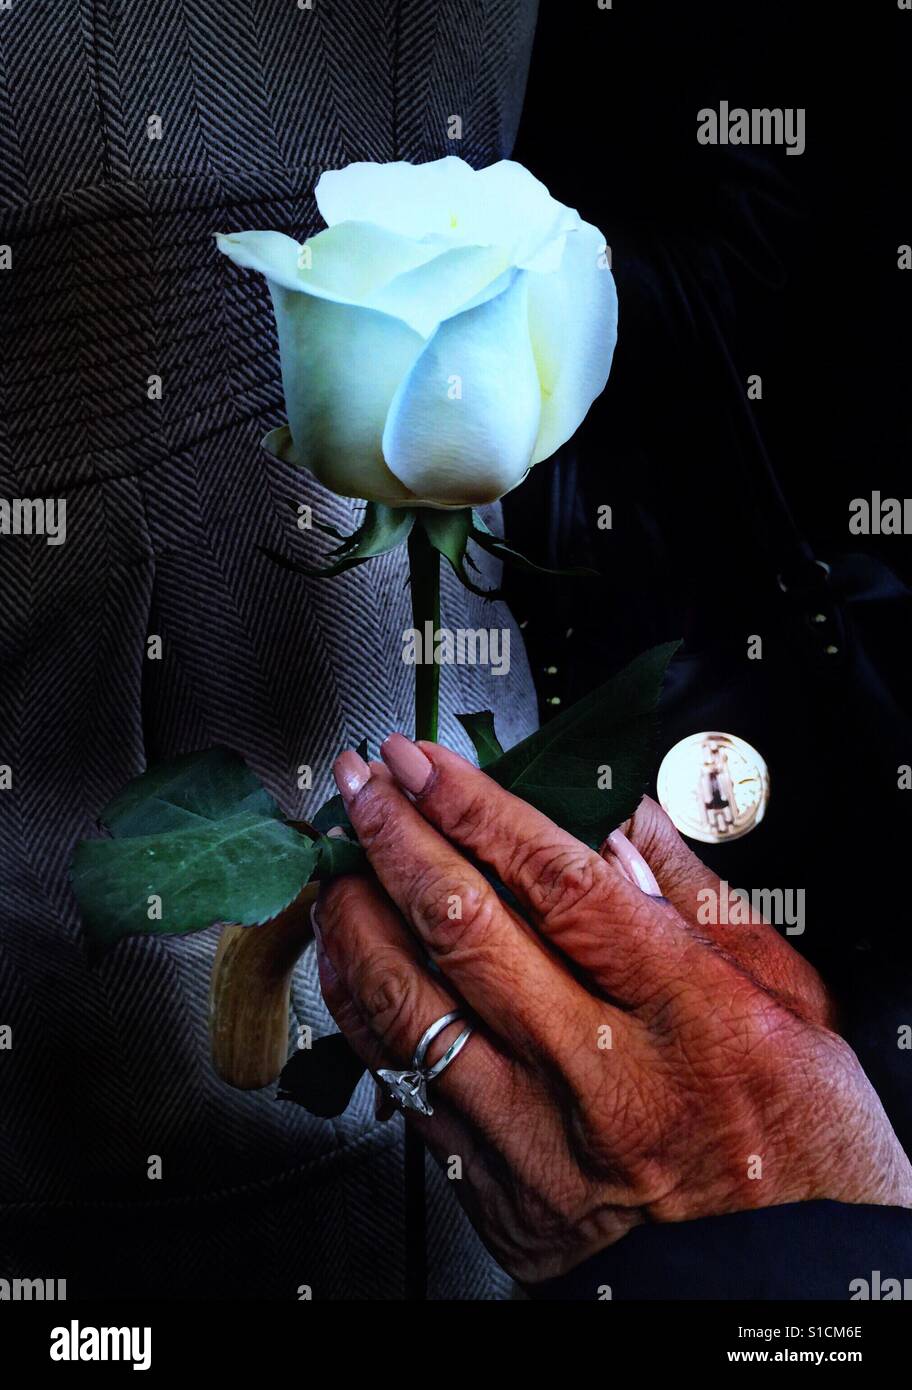 Special white long stem rose held with special hands Stock Photo